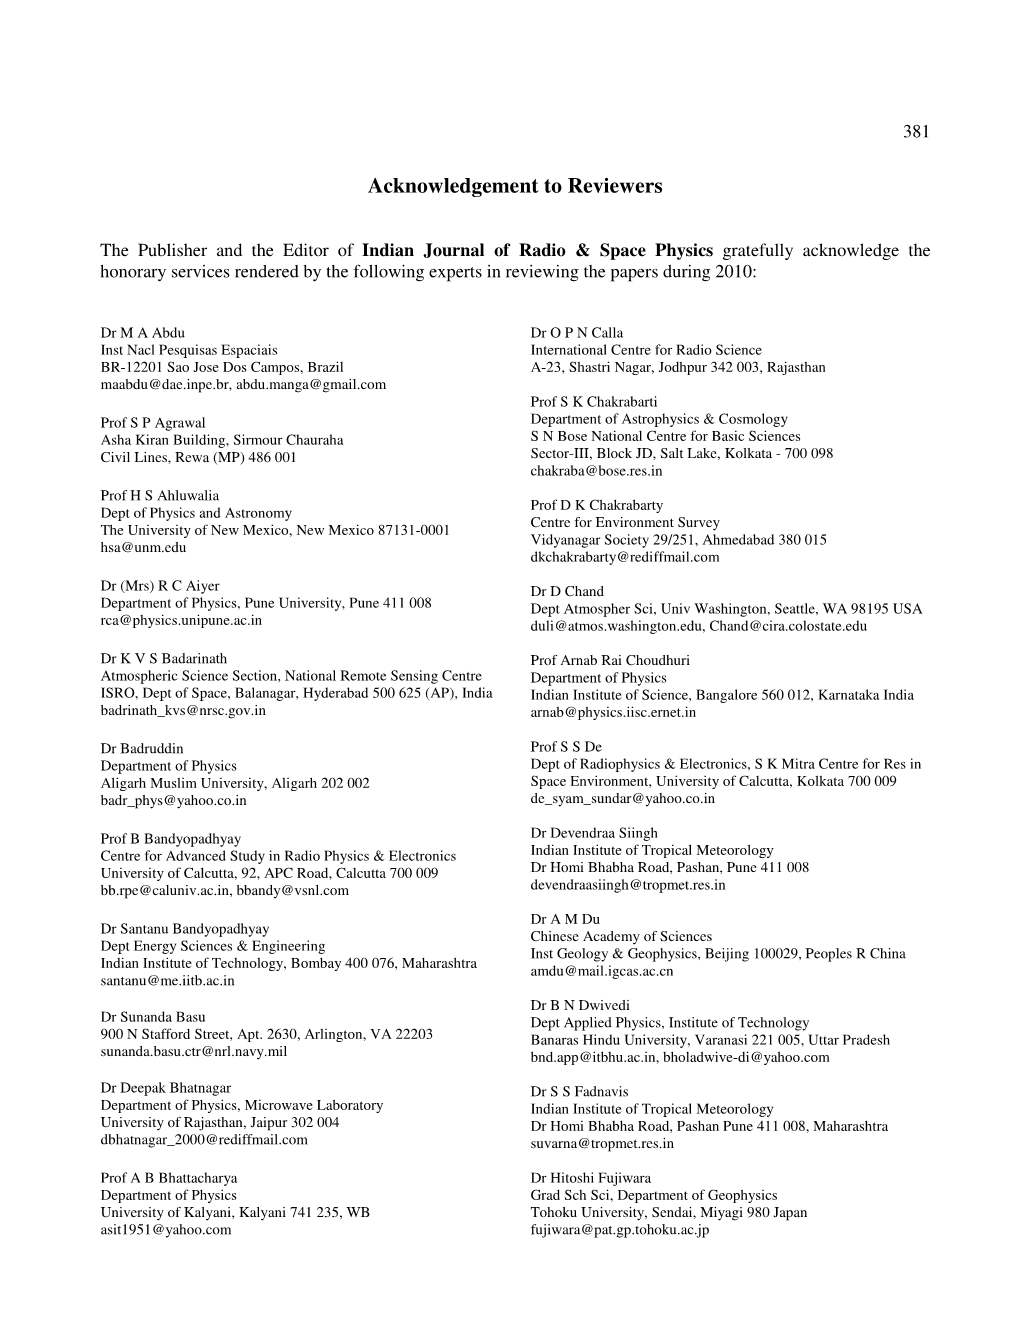 Acknowledgement to Reviewers